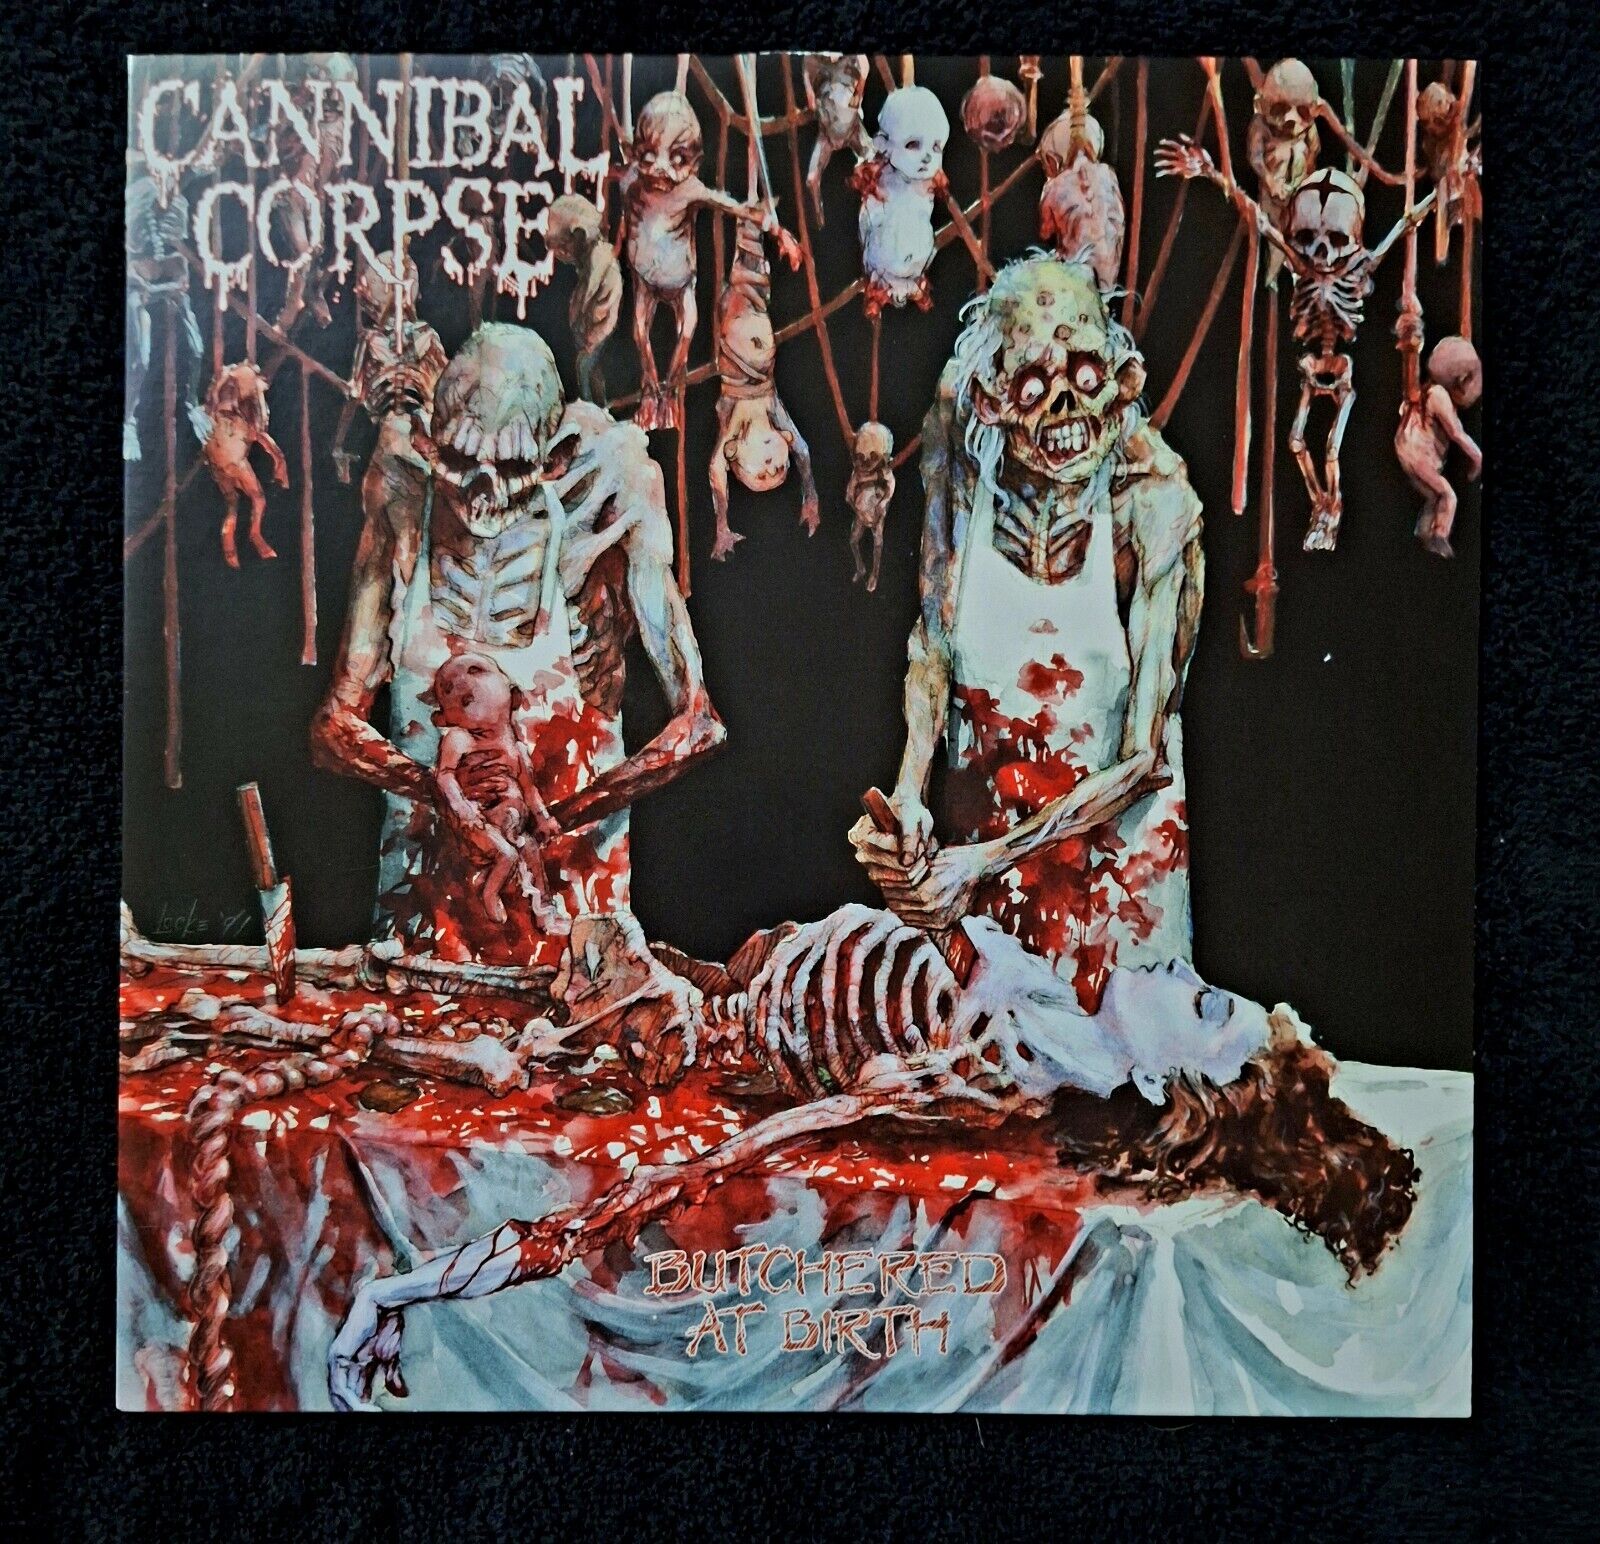 Cannibal Corpse Butchered At Birth  Coloured Vinyl & Wretched Spawn Black Vinyl